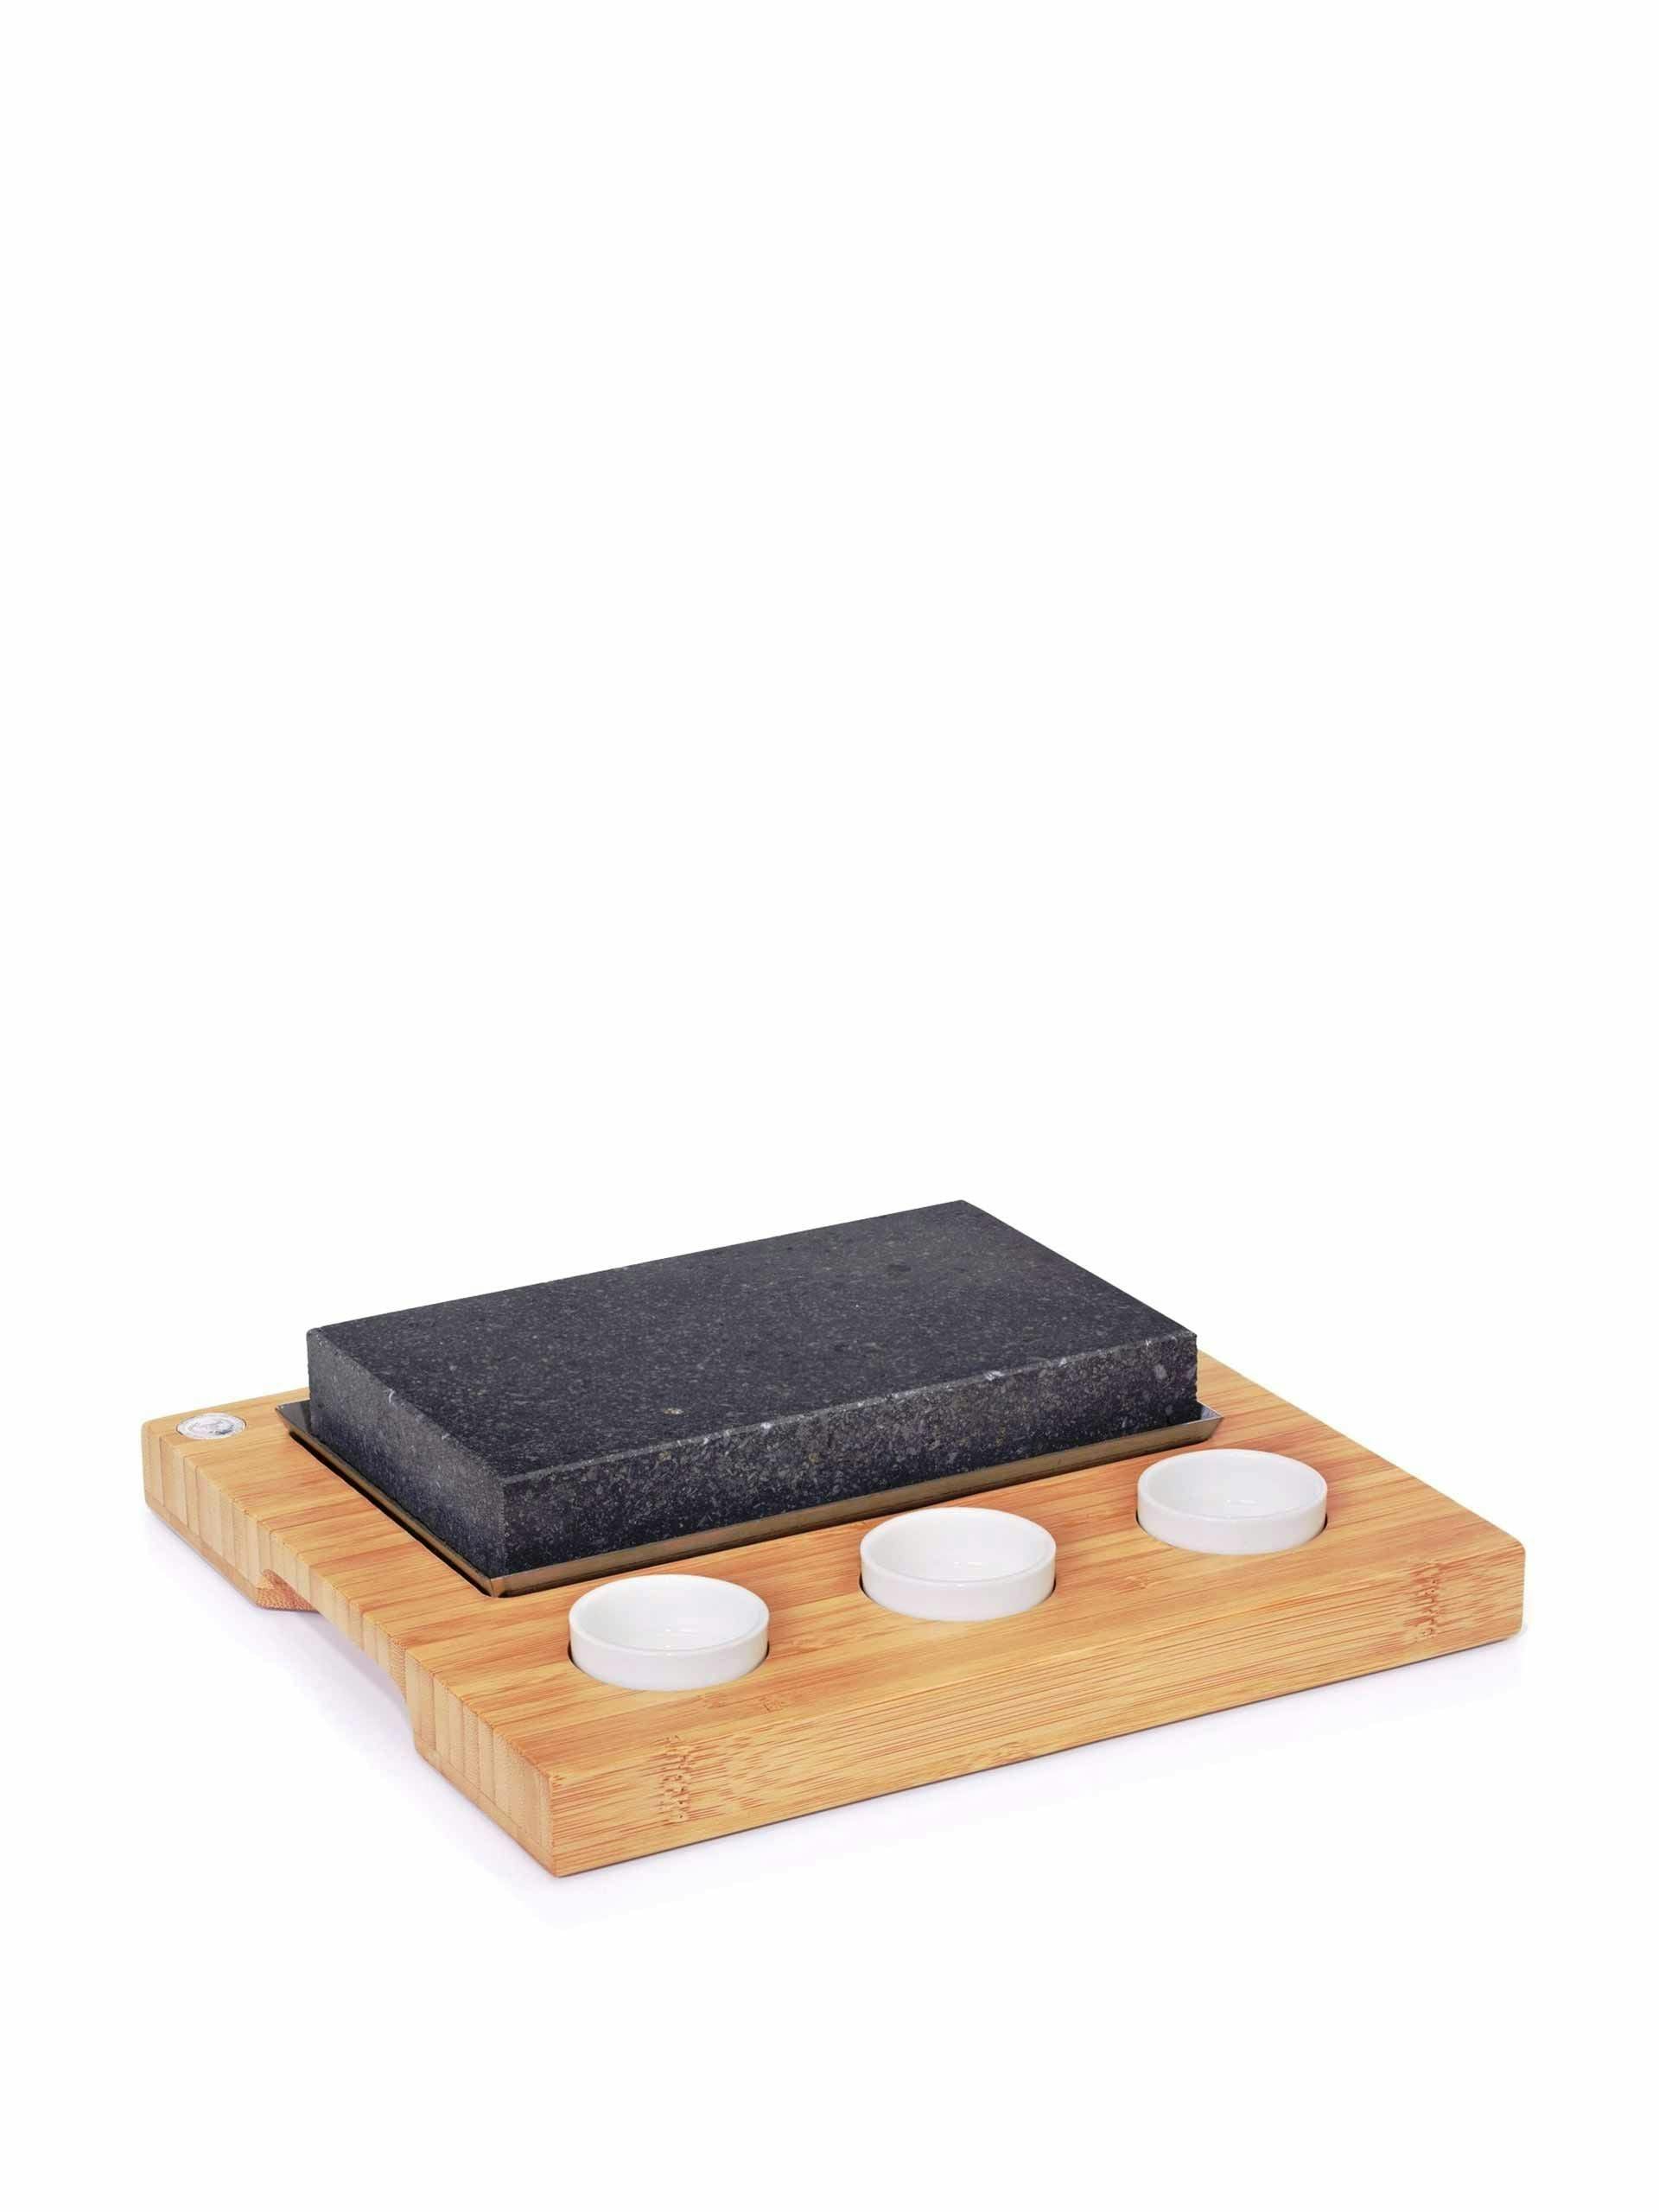 Hot stone cooking set